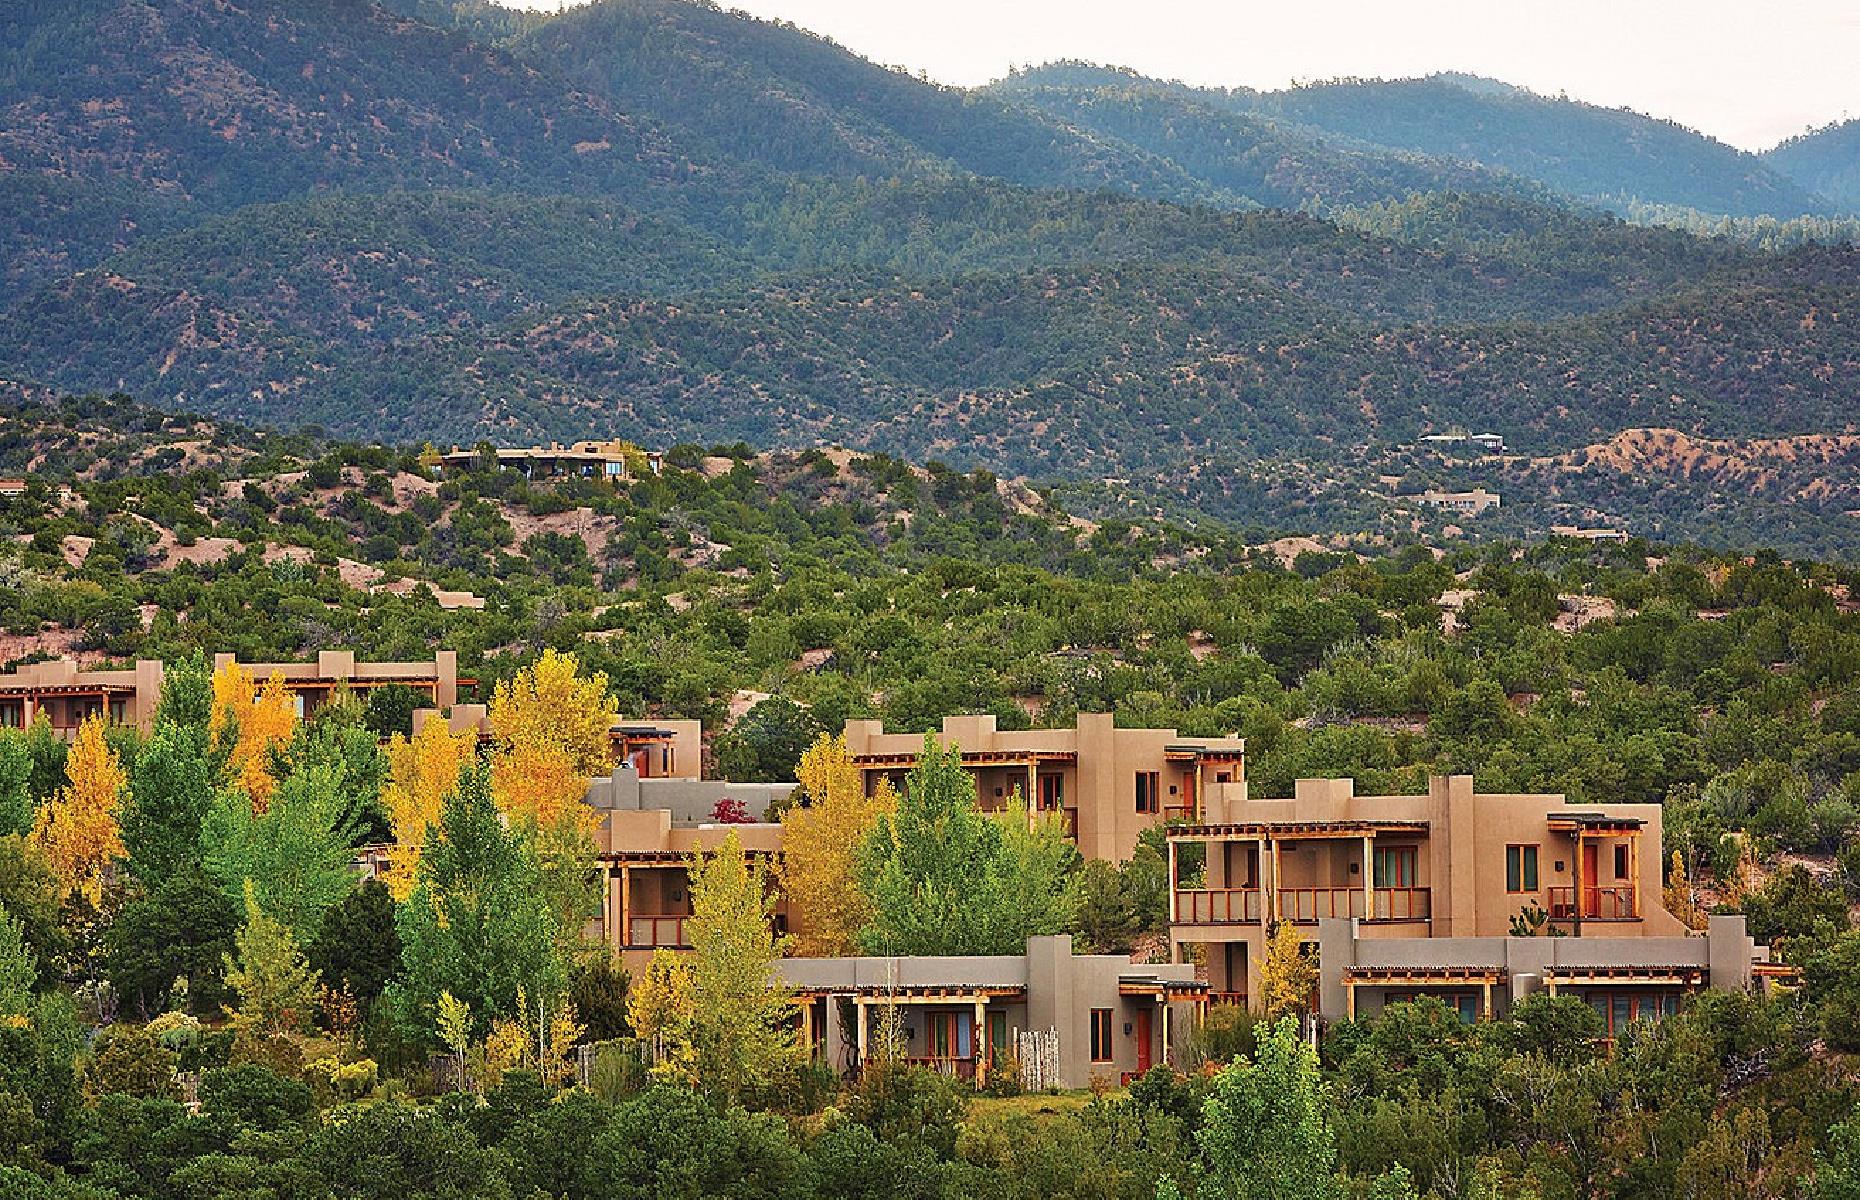 <p>With only 65 rooms and the cover of the Sangre de Cristo mountains, this <a href="https://www.fourseasons.com/santafe/">boutique resort</a> showcases both the urban cool of Santa Fe and the wonder of the Southwest’s wilderness. The hotel’s amenities – well-appointed rooms, a top-rate spa and plenty of picturesque places to lounge – are reason enough for a stay, but the surrounding area also offers guests the chance to hike, bike and even take hot-air balloon rides.</p>